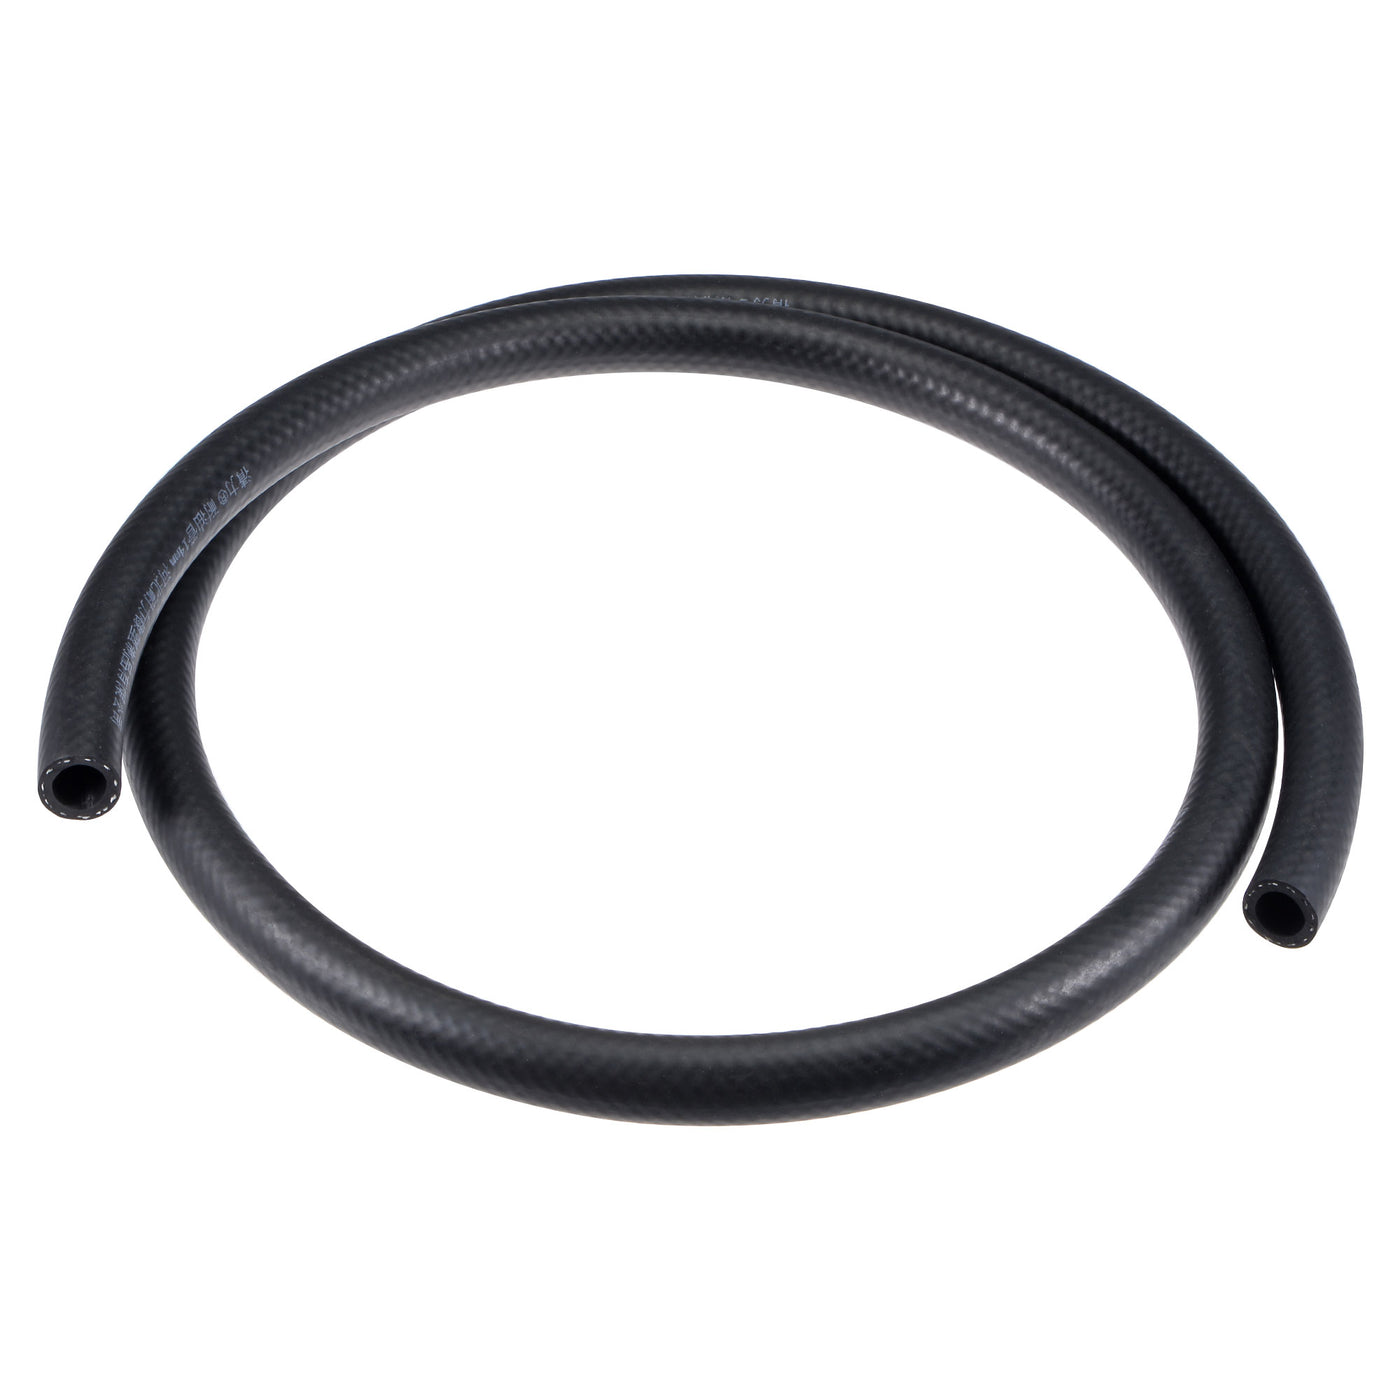 uxcell Uxcell 9/16" ID Fuel Line Hose, 13/16" OD 5ft Oil Tubing Black for Small Engines